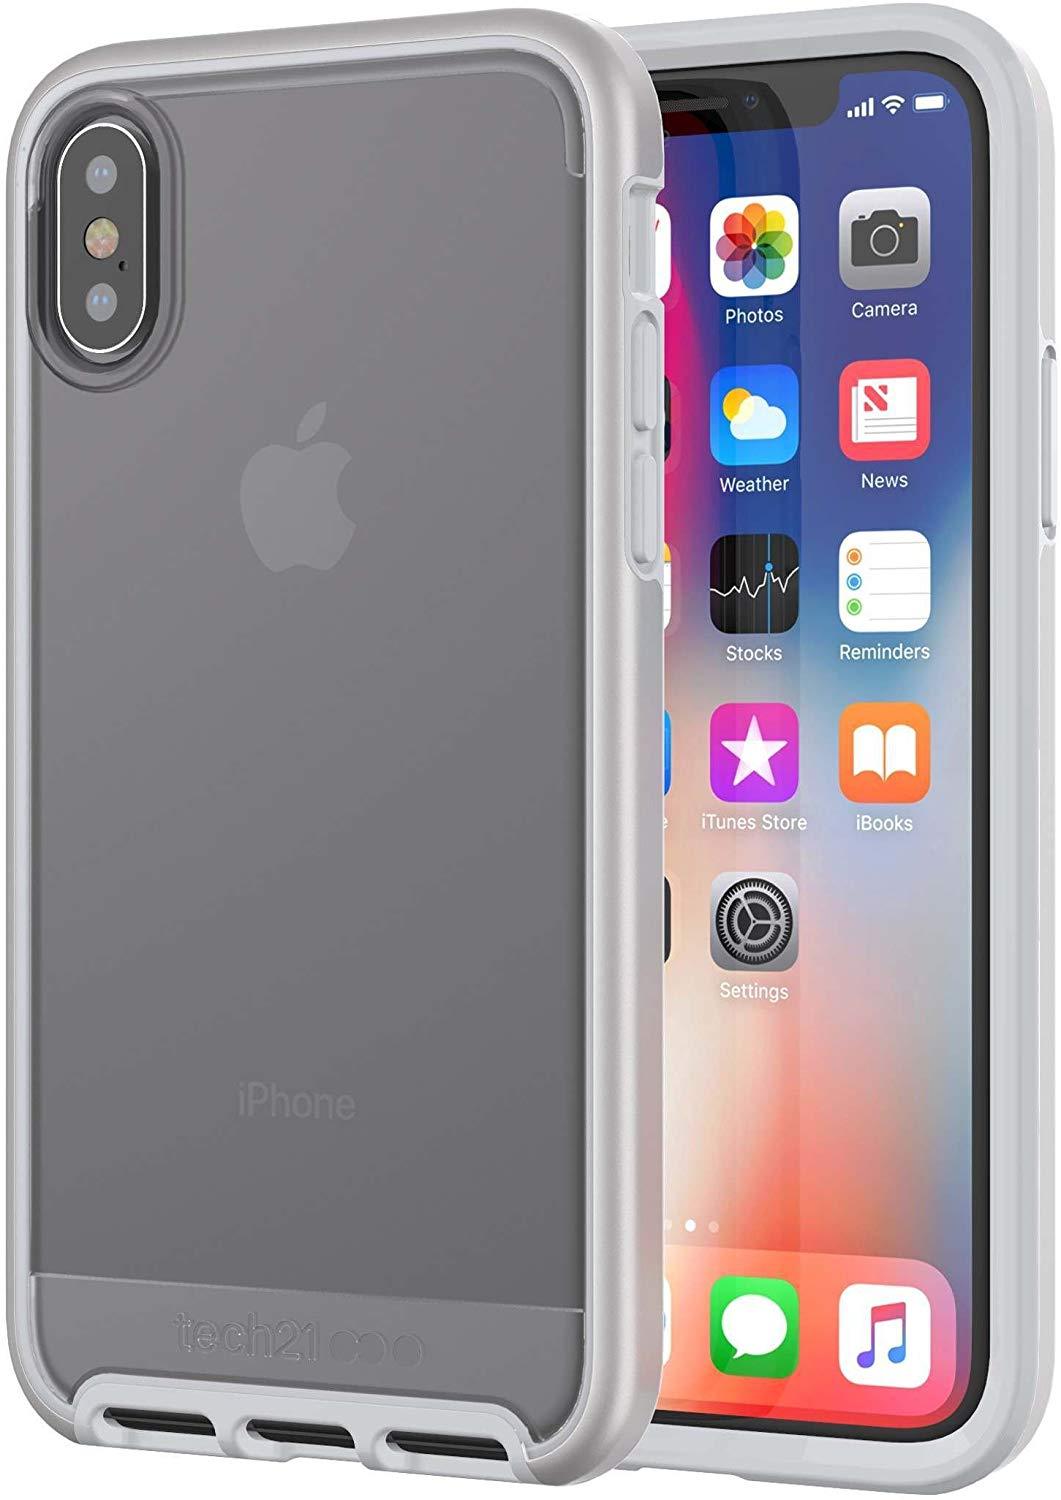 Tech21 Case for iPhone X iPhone XS - Evo Elite FlexShock Drop Protection Cover - Silver